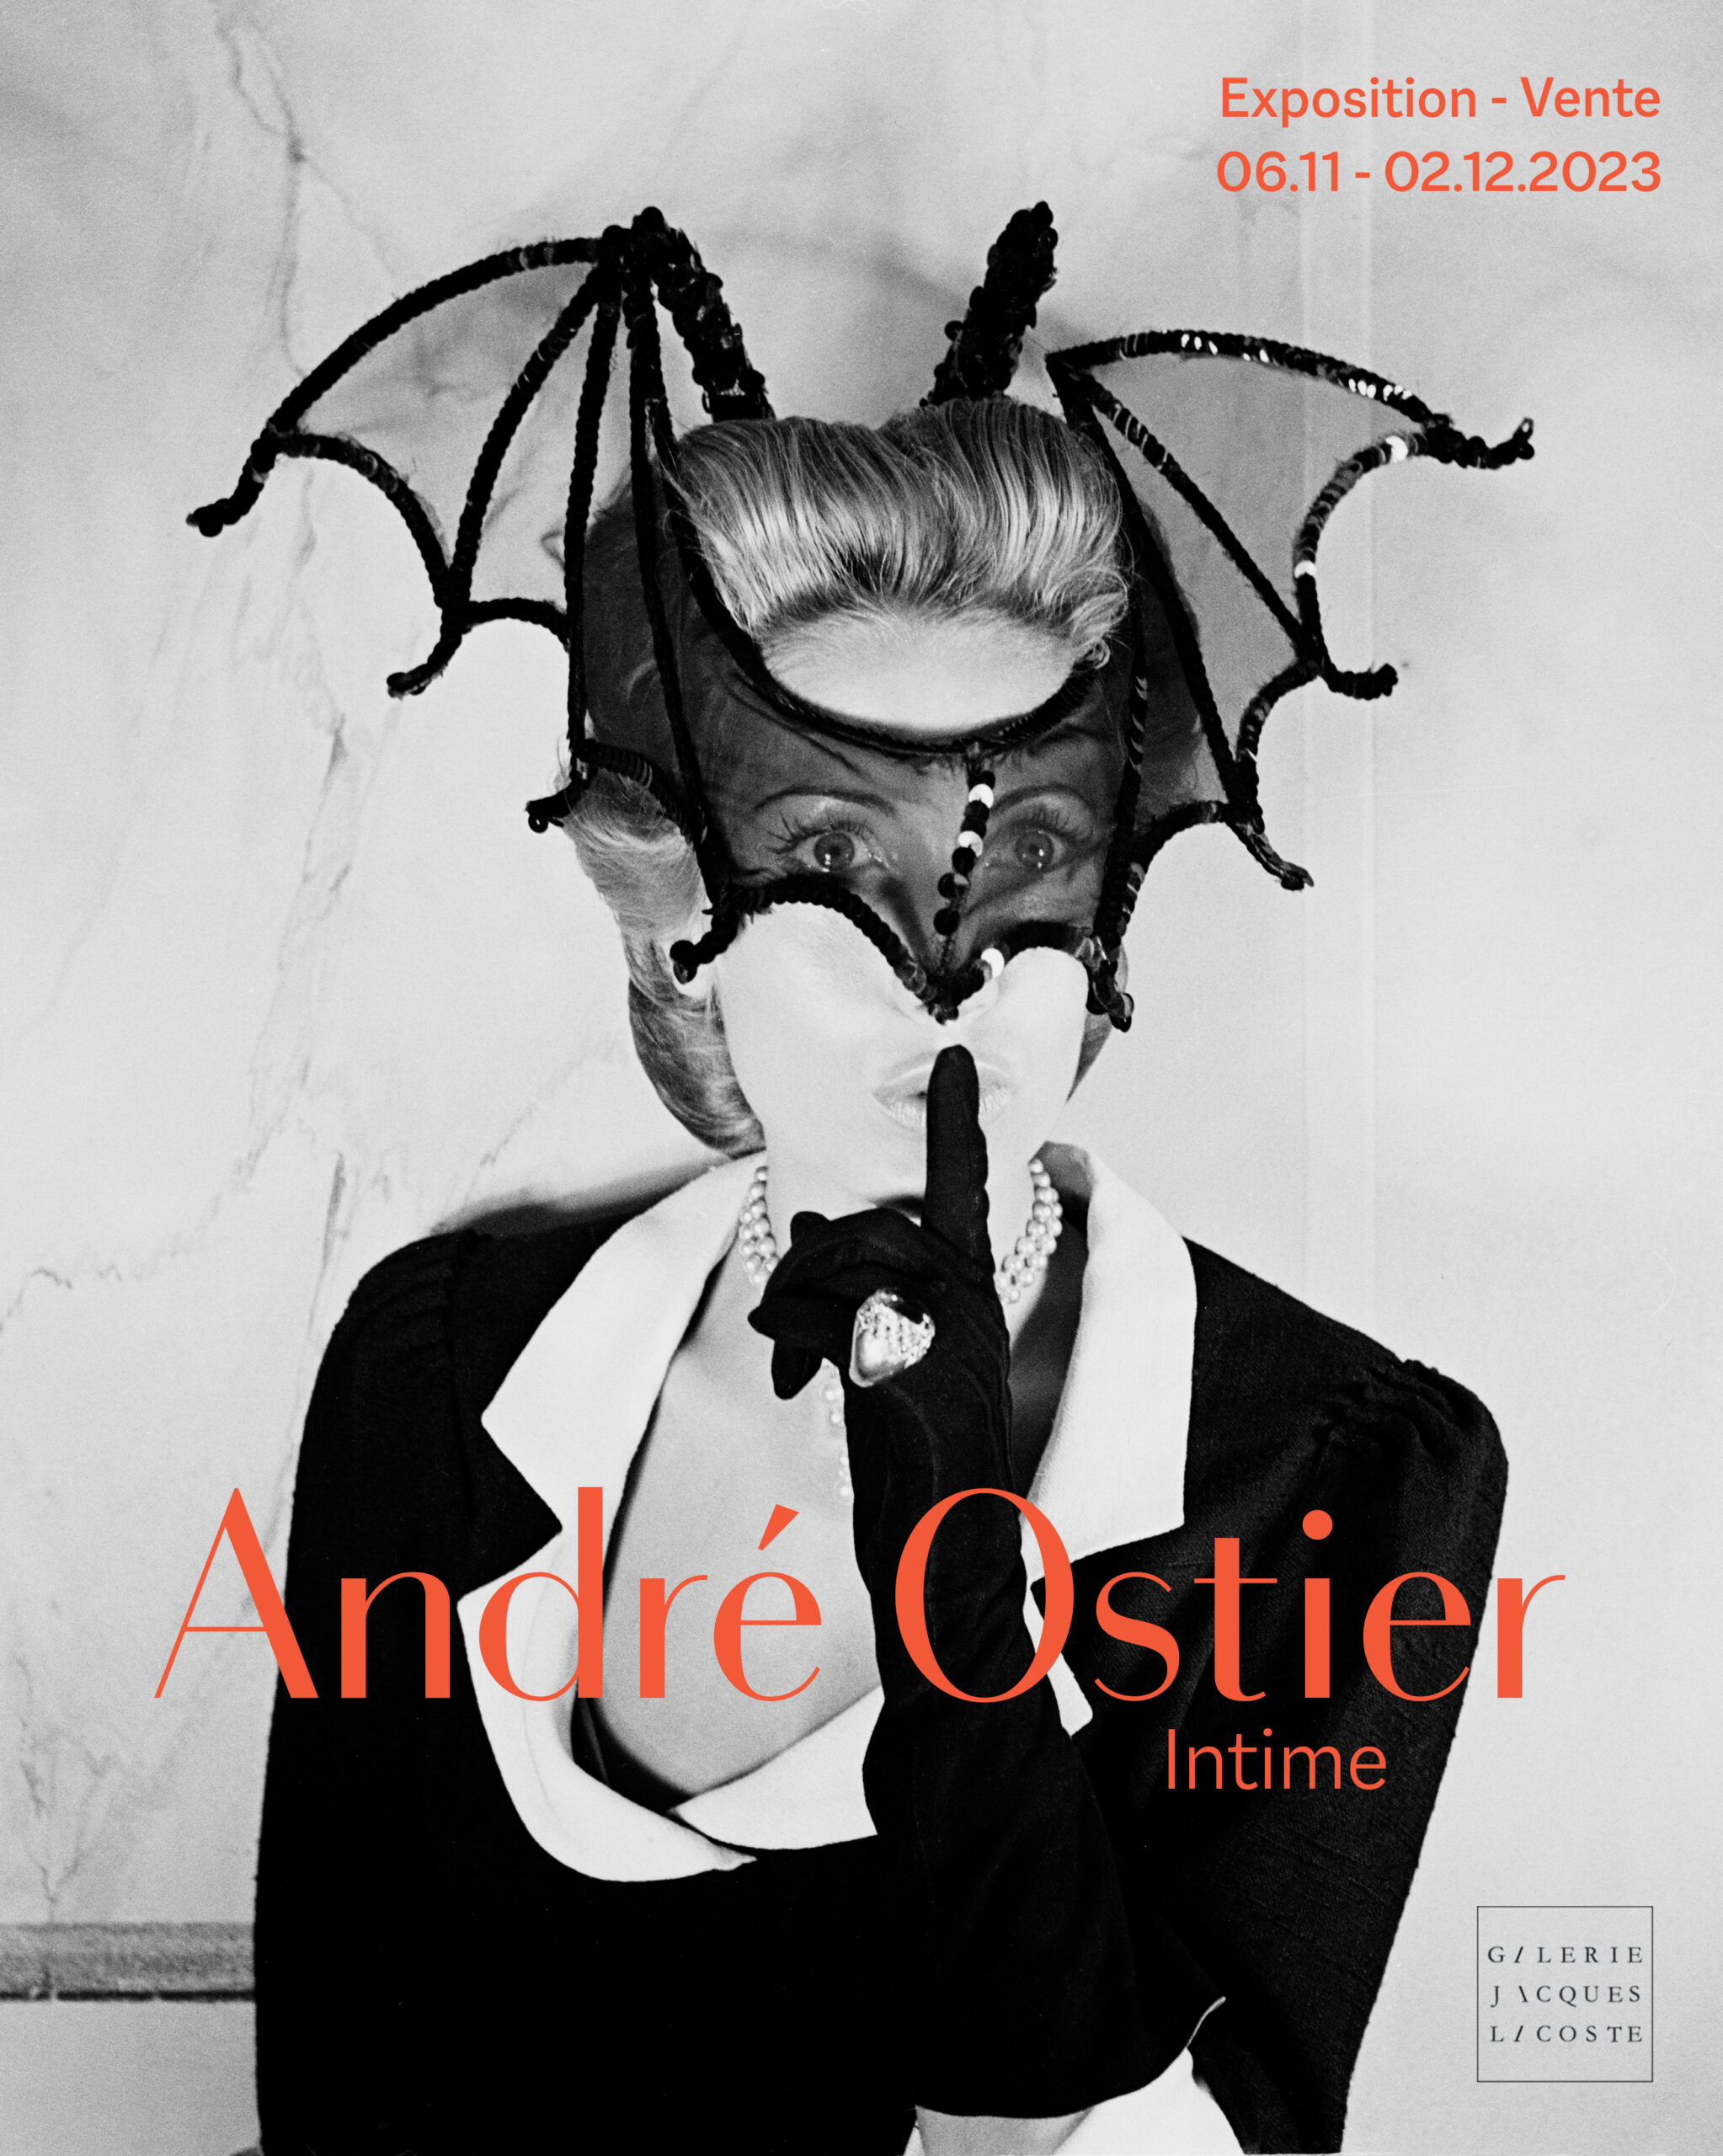 Exposition André Ostier - Intime